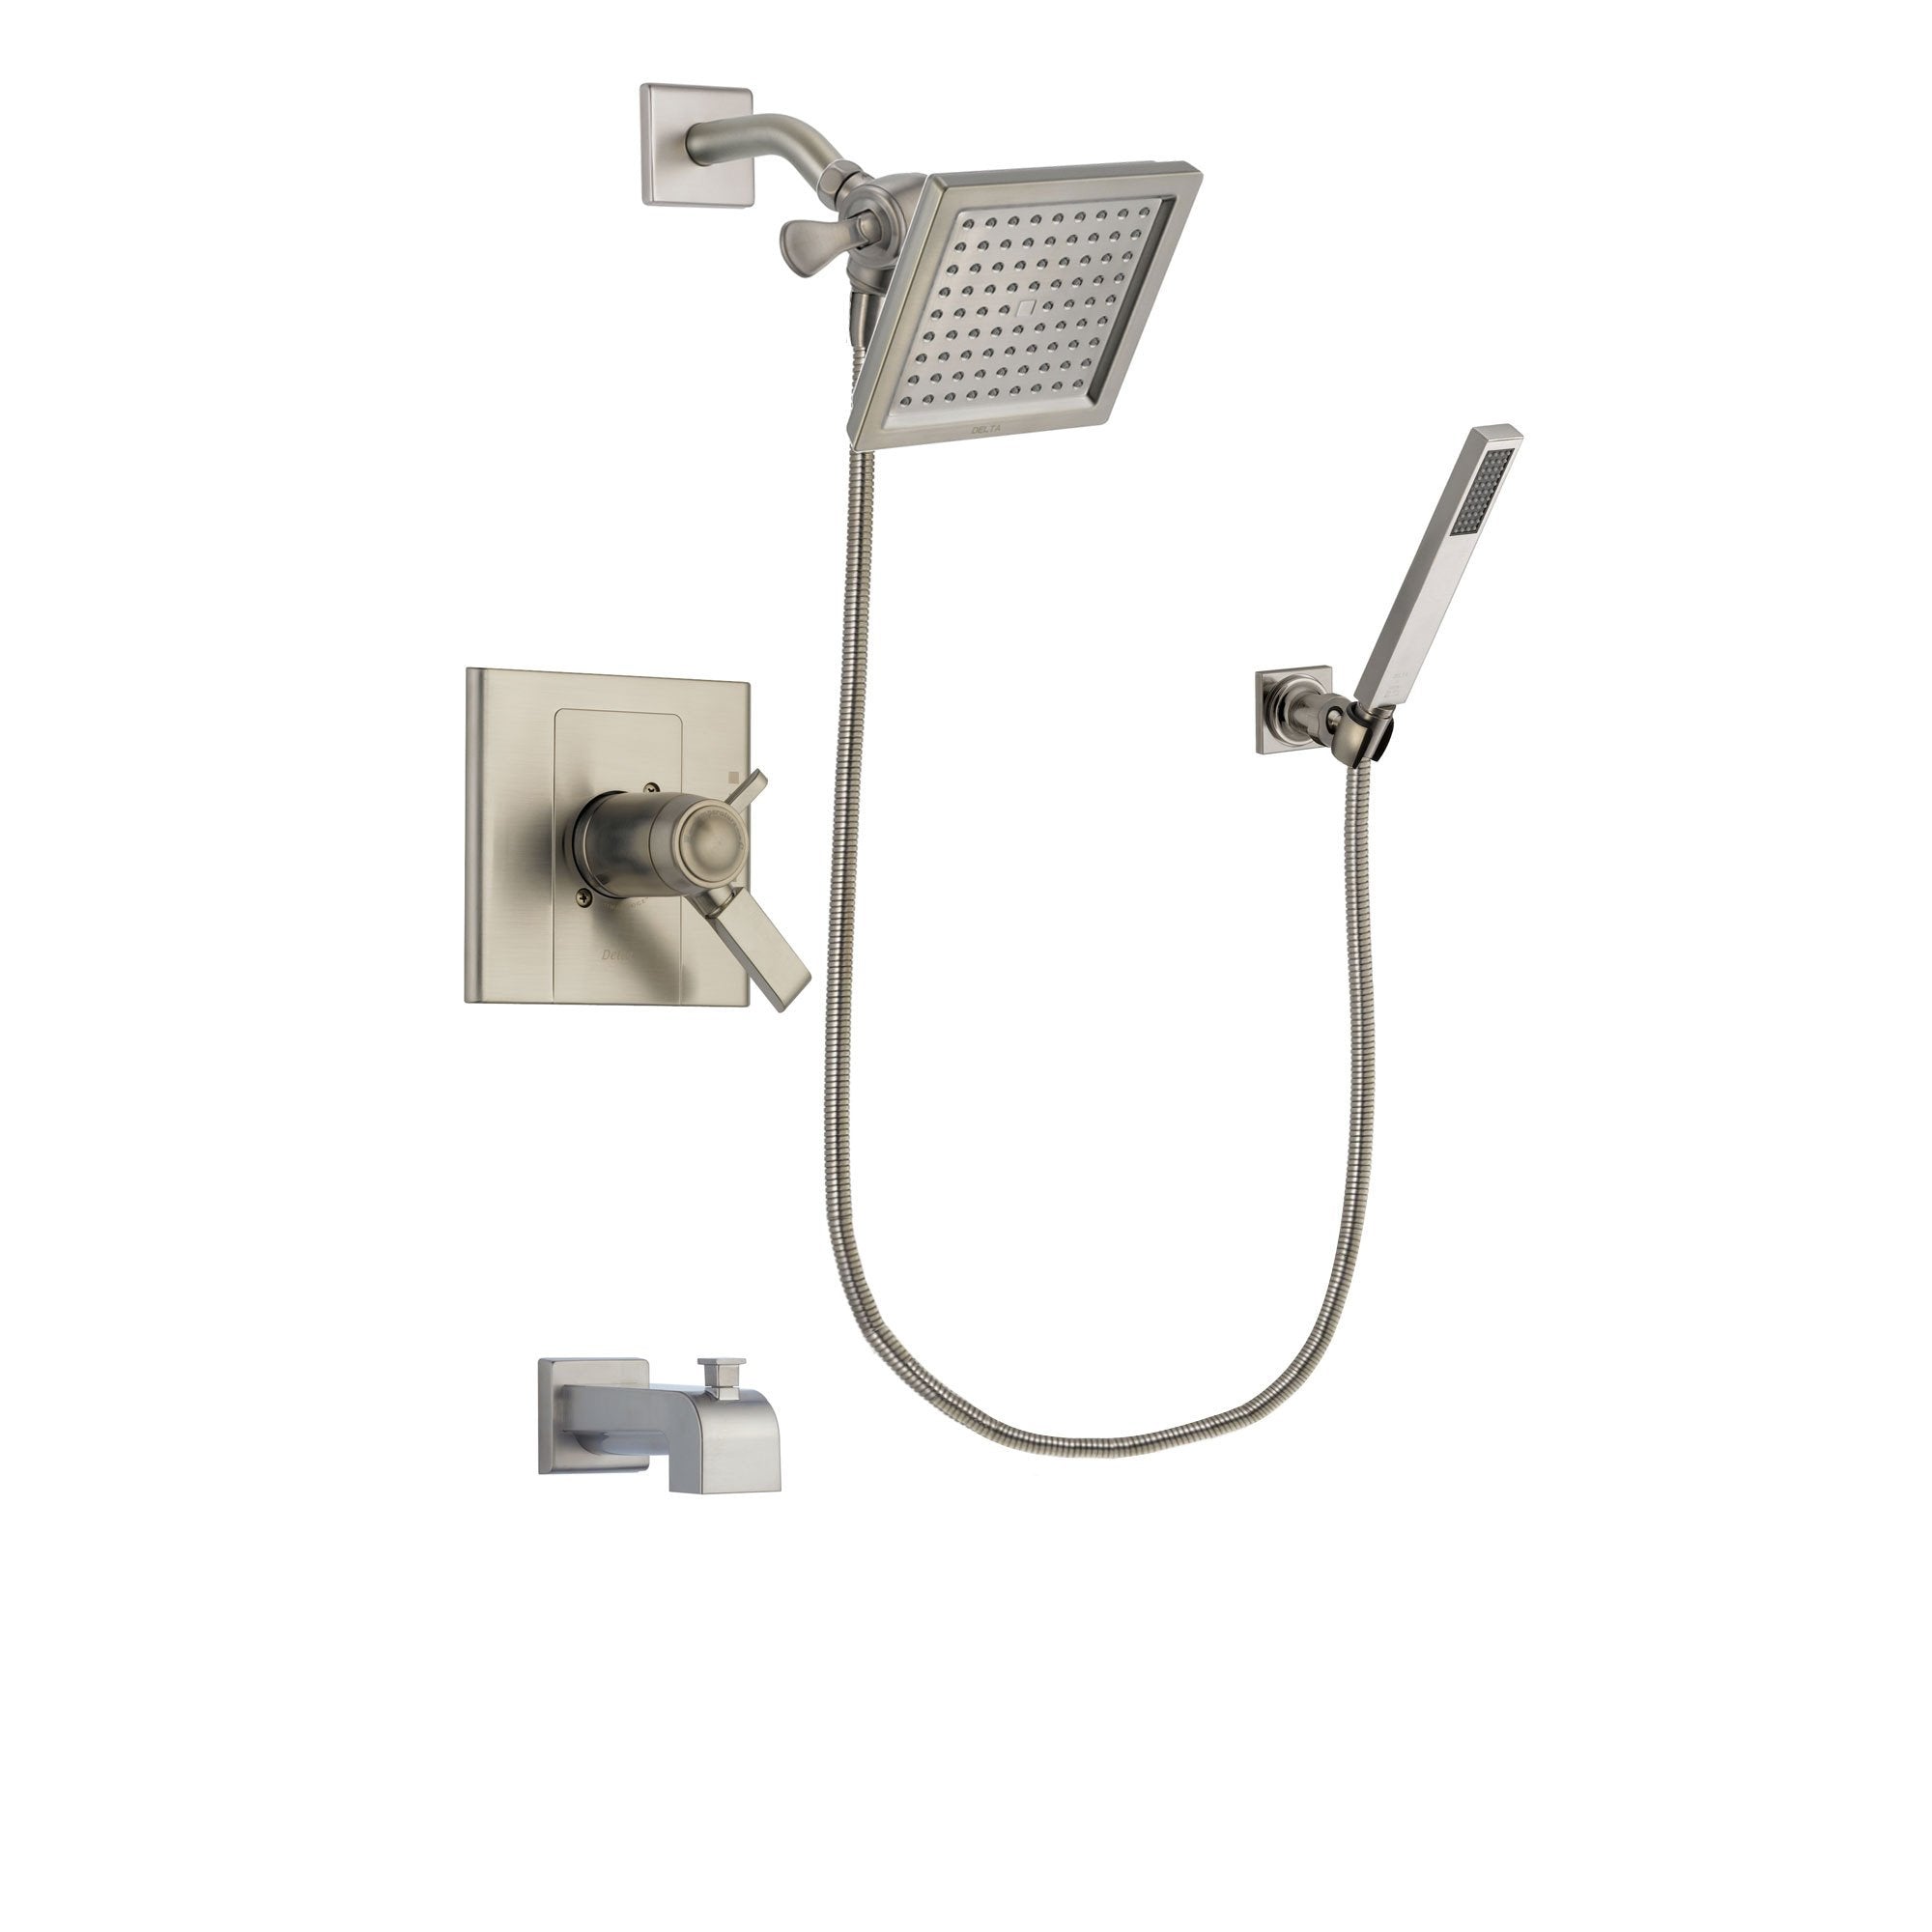 Delta Arzo Stainless Steel Finish Thermostatic Tub and Shower Faucet System Package with 6.5-inch Square Rain Showerhead and Wall-Mount Handheld Shower Stick Includes Rough-in Valve and Tub Spout DSP2187V